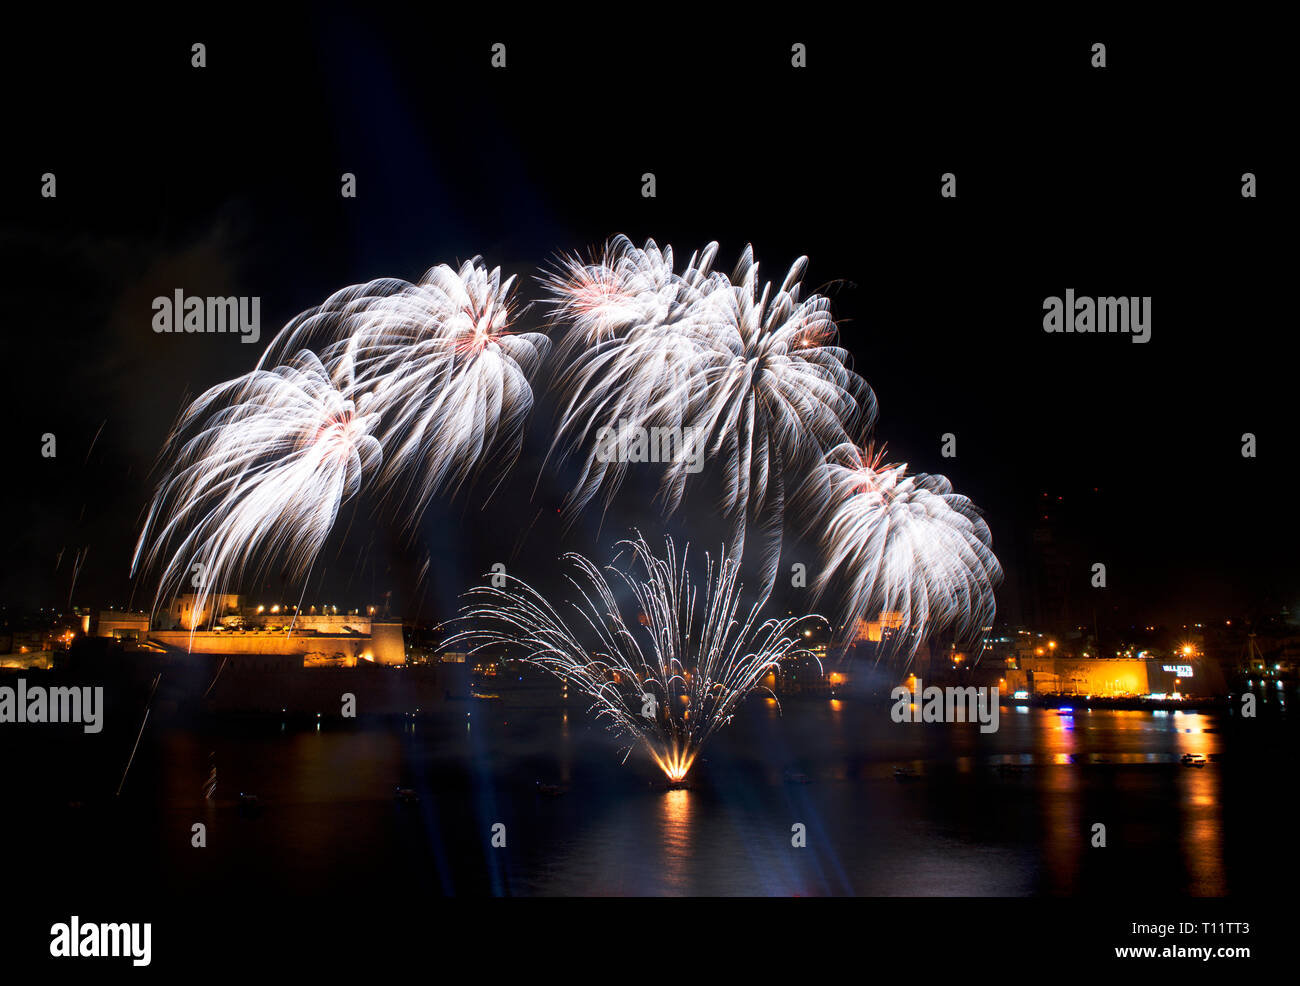 Fireworks show,colorful fireworks on the black sky background, fireworks explosion in the dark sky with city silouthe on bottom, fireworks in Malta Stock Photo